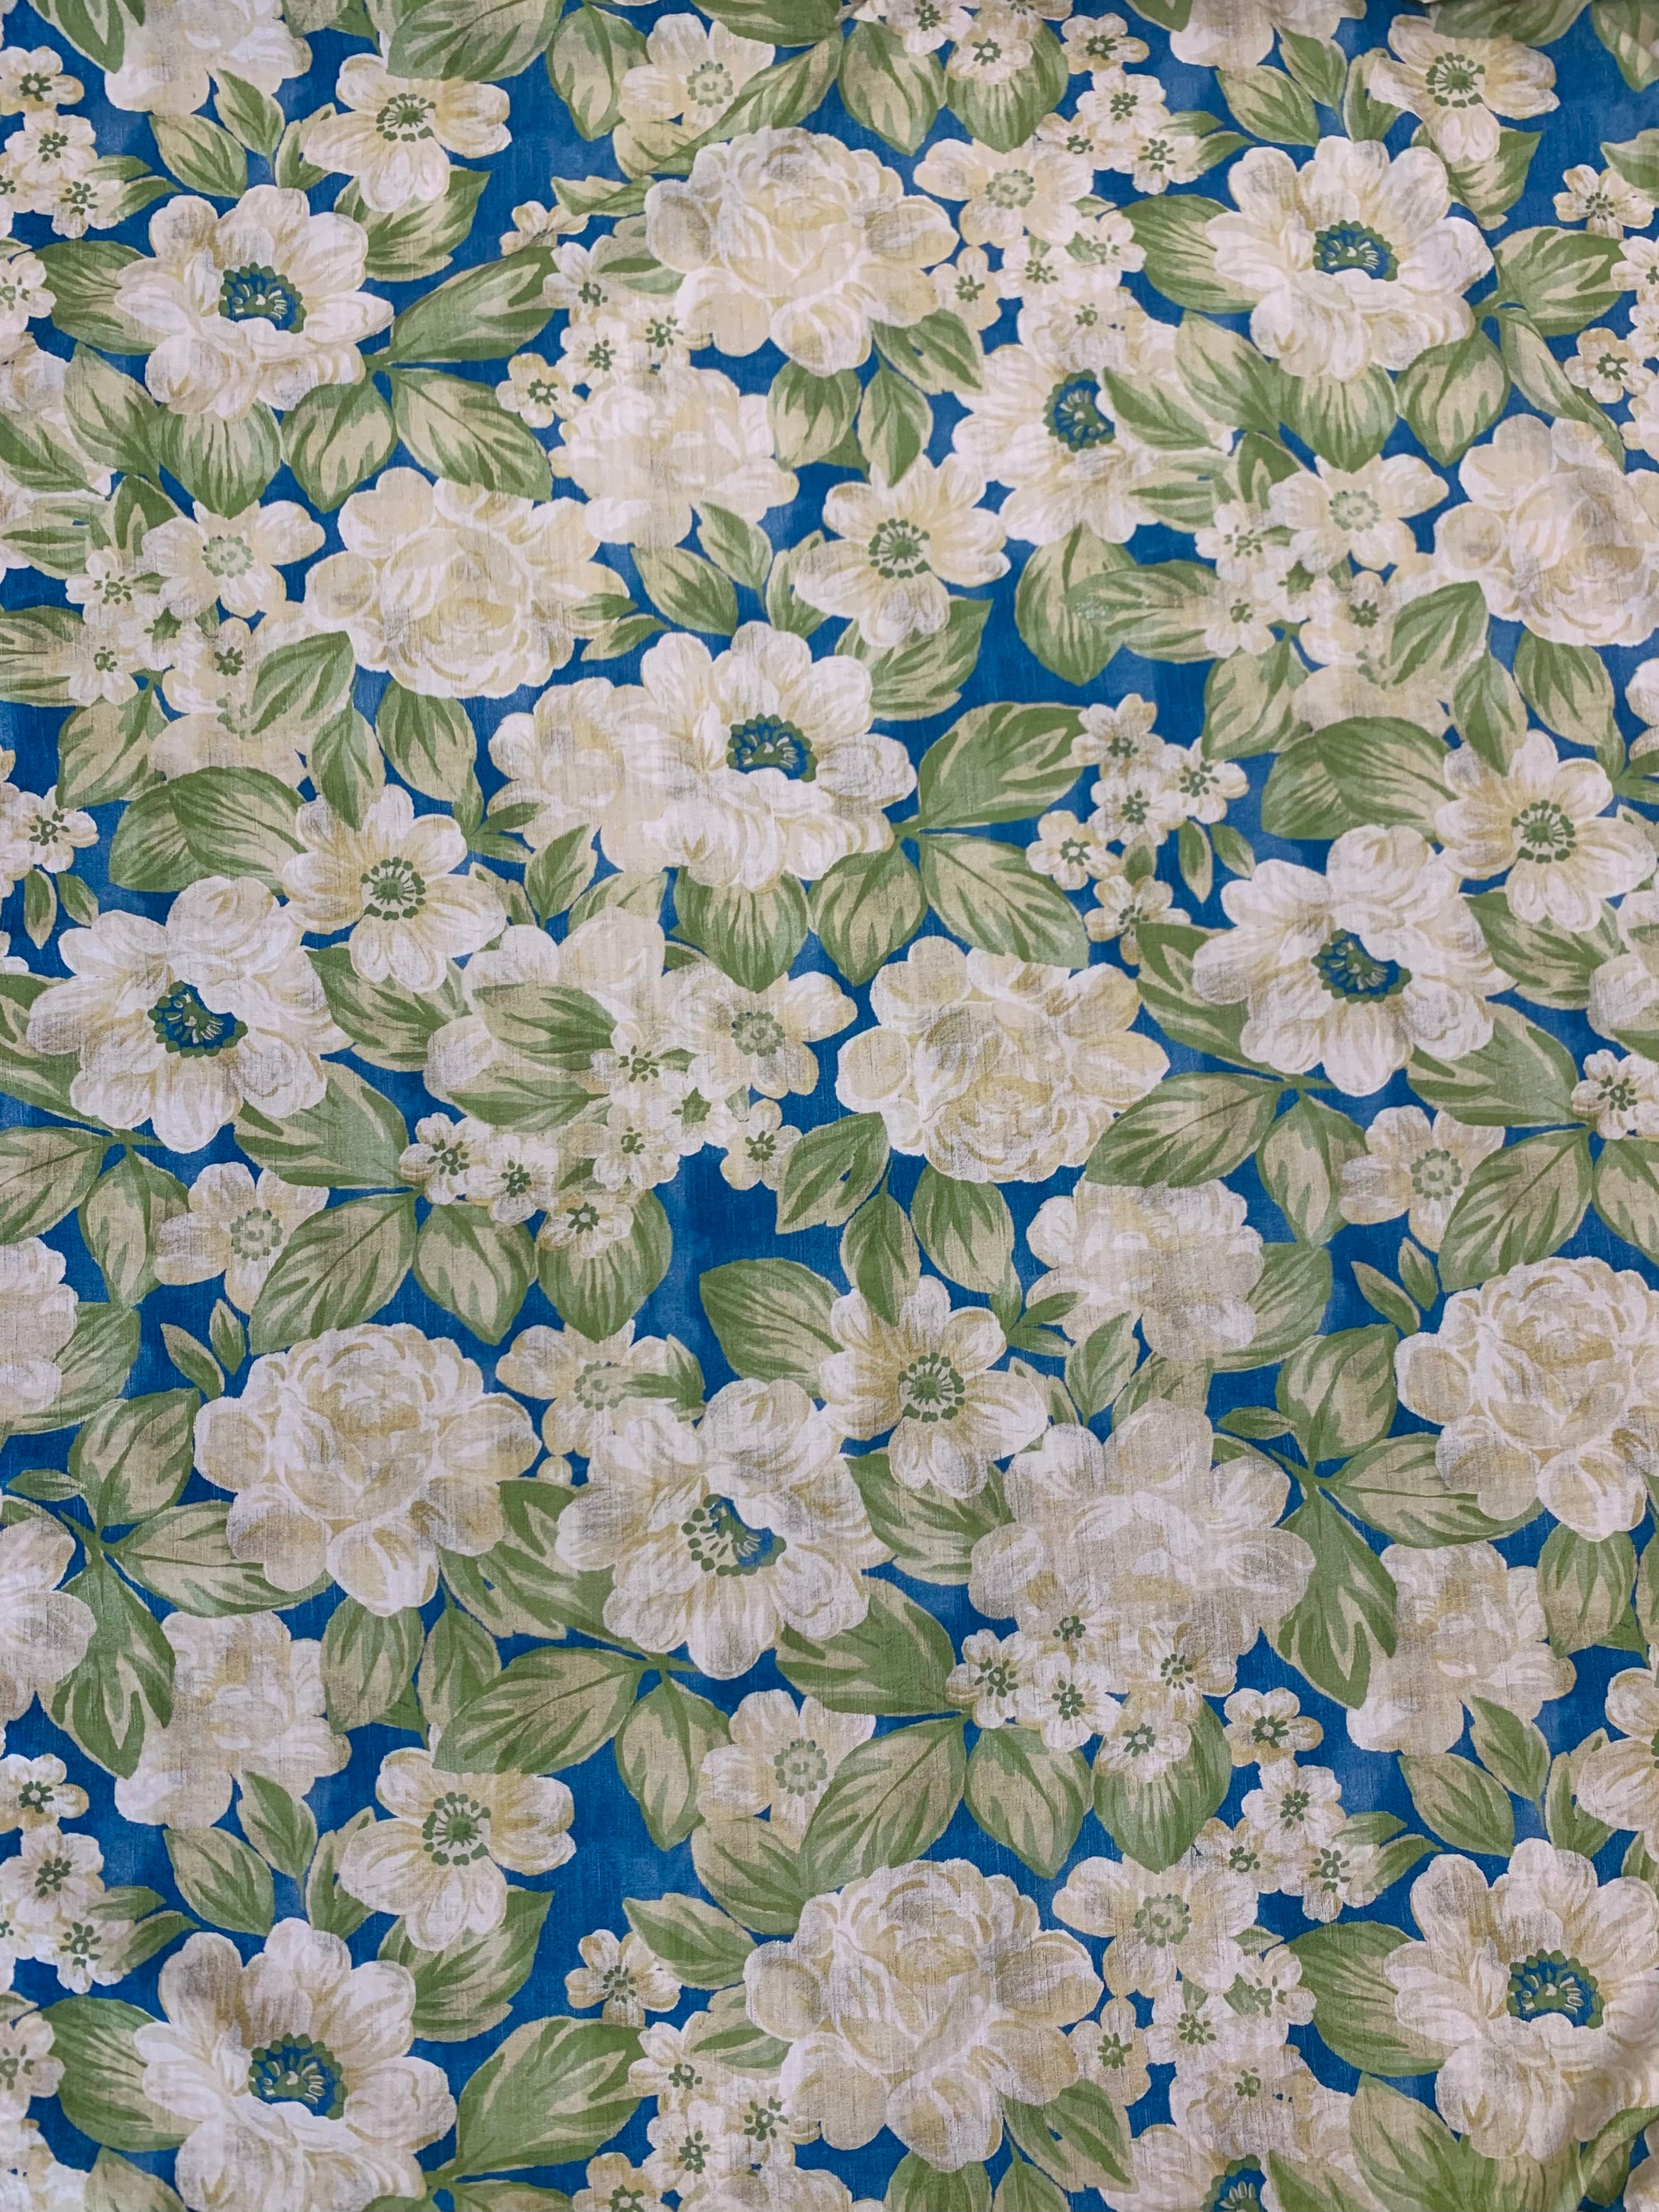 flat cotton seersucker in a royal blue with a beige and green rose floral print with a measuring tape on top.